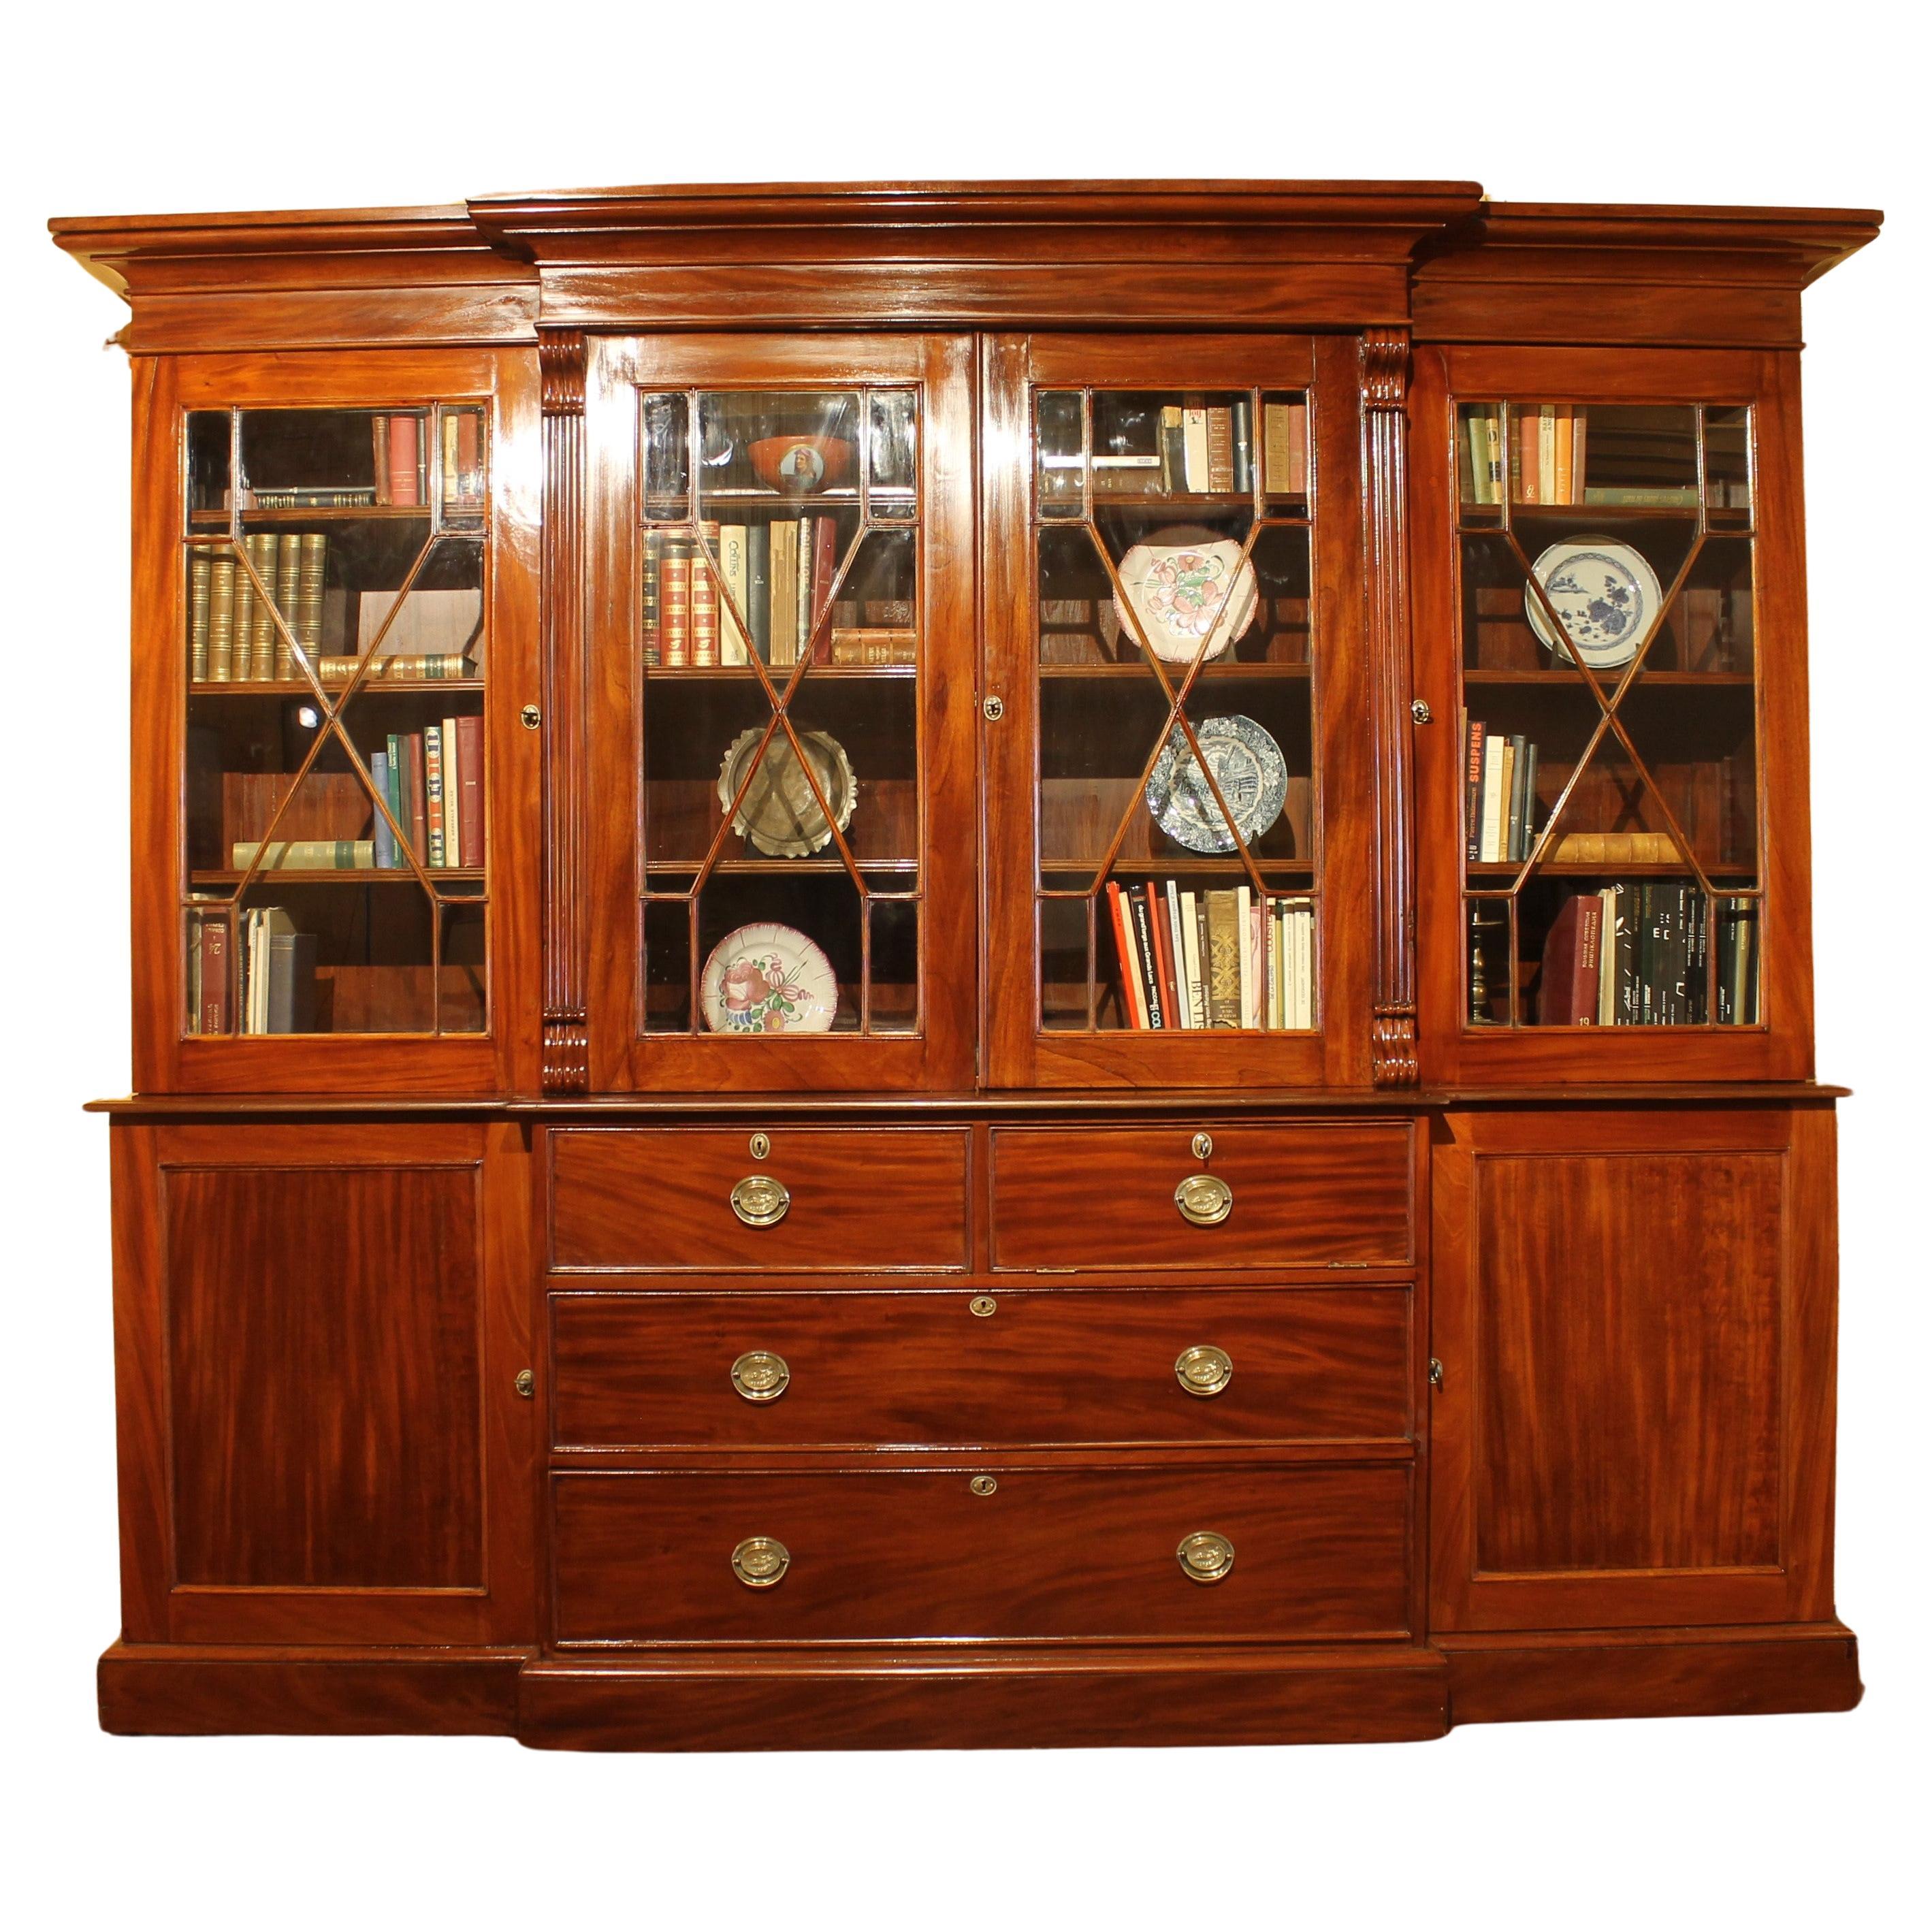 Important Mahogany Library Bookcase From The 19th Century From England